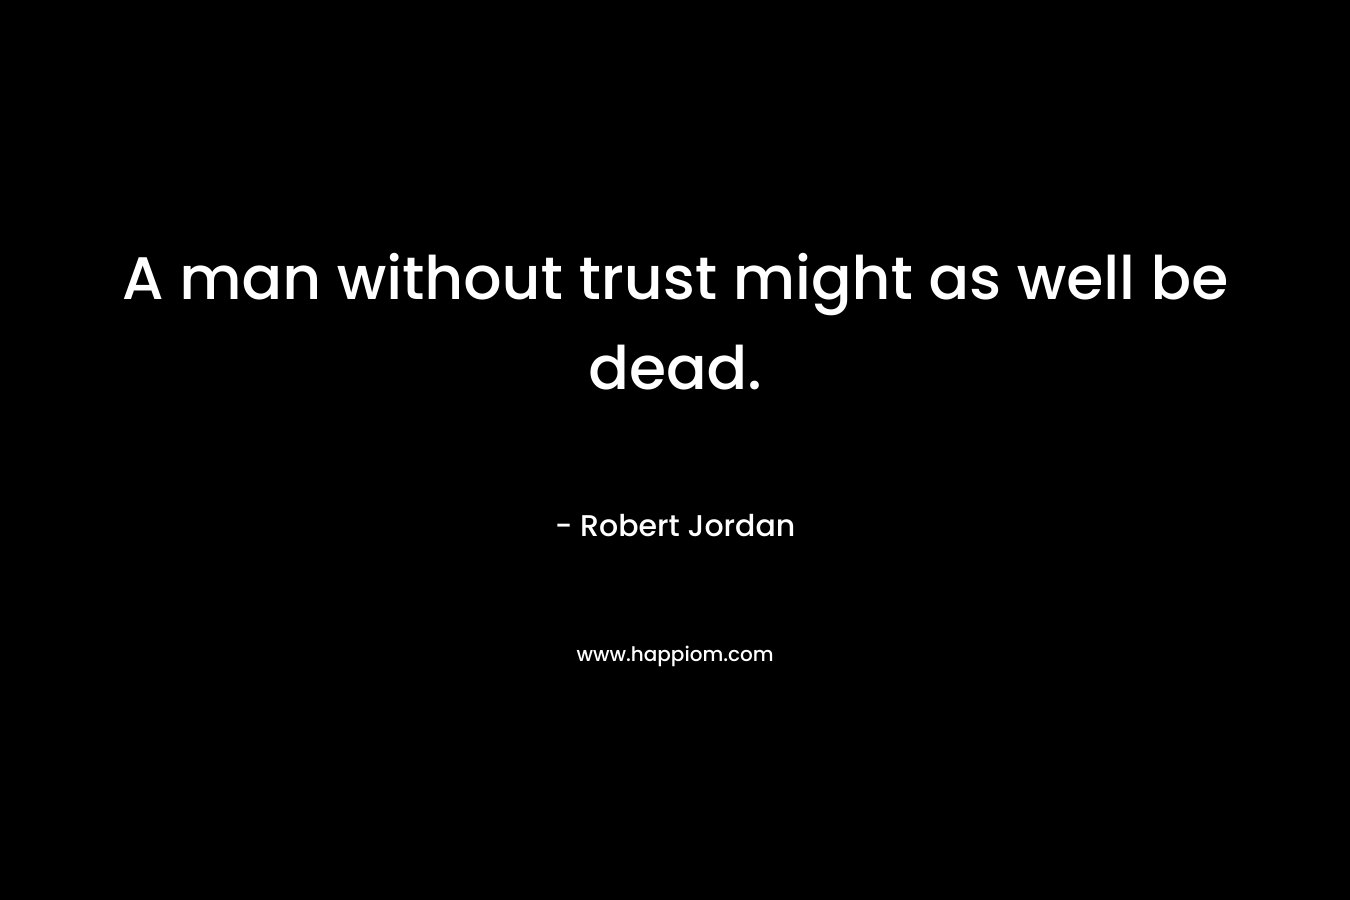 A man without trust might as well be dead.